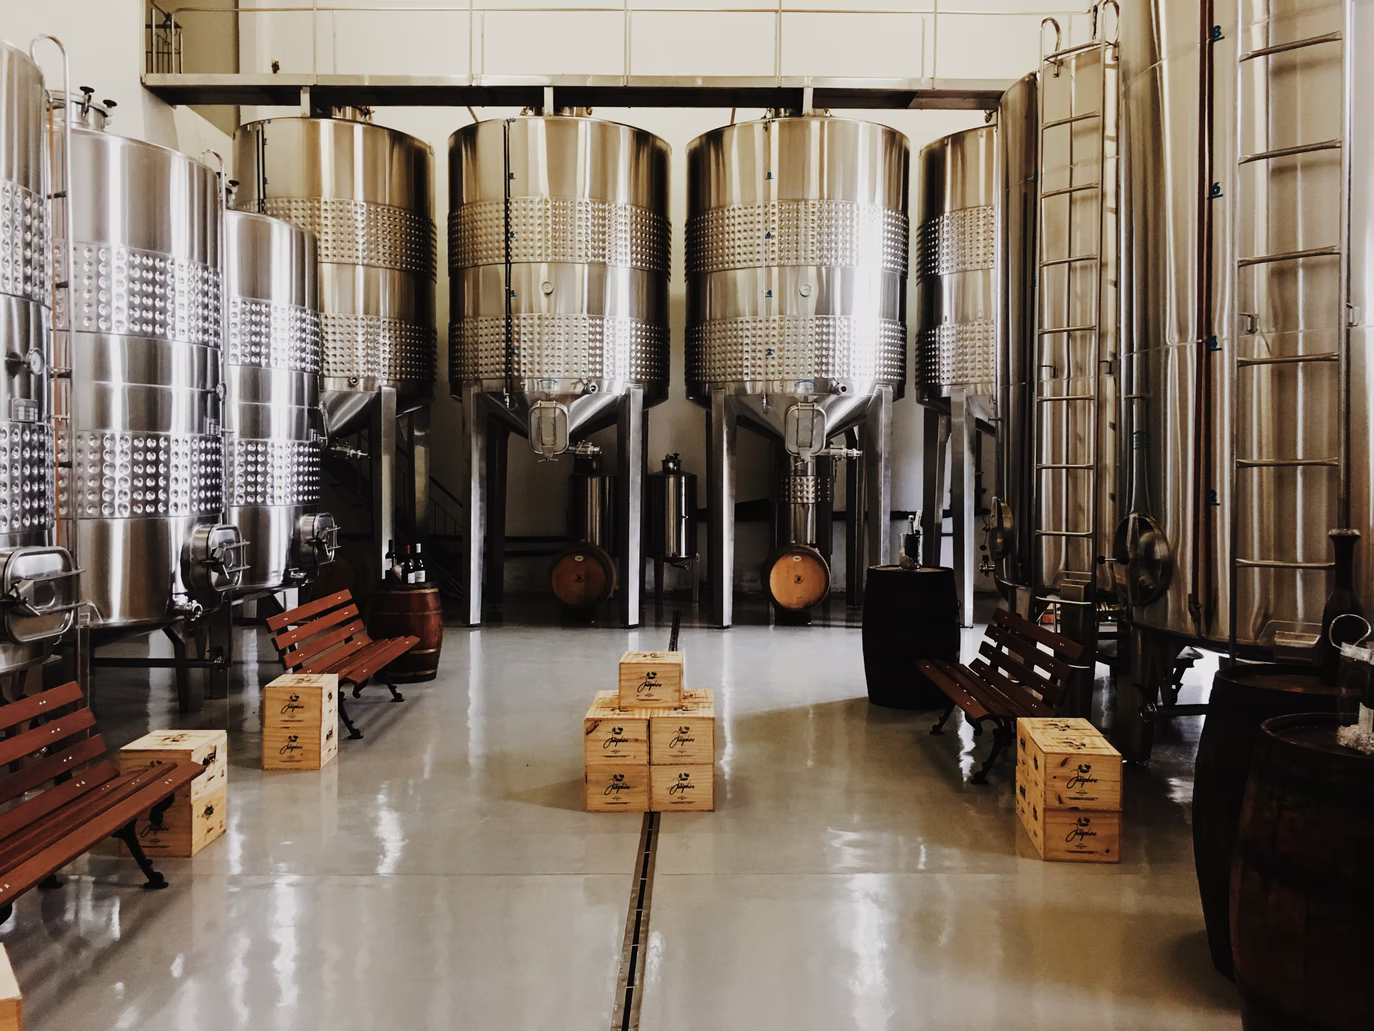 The Essential Guide to Starting a Craft Brewery